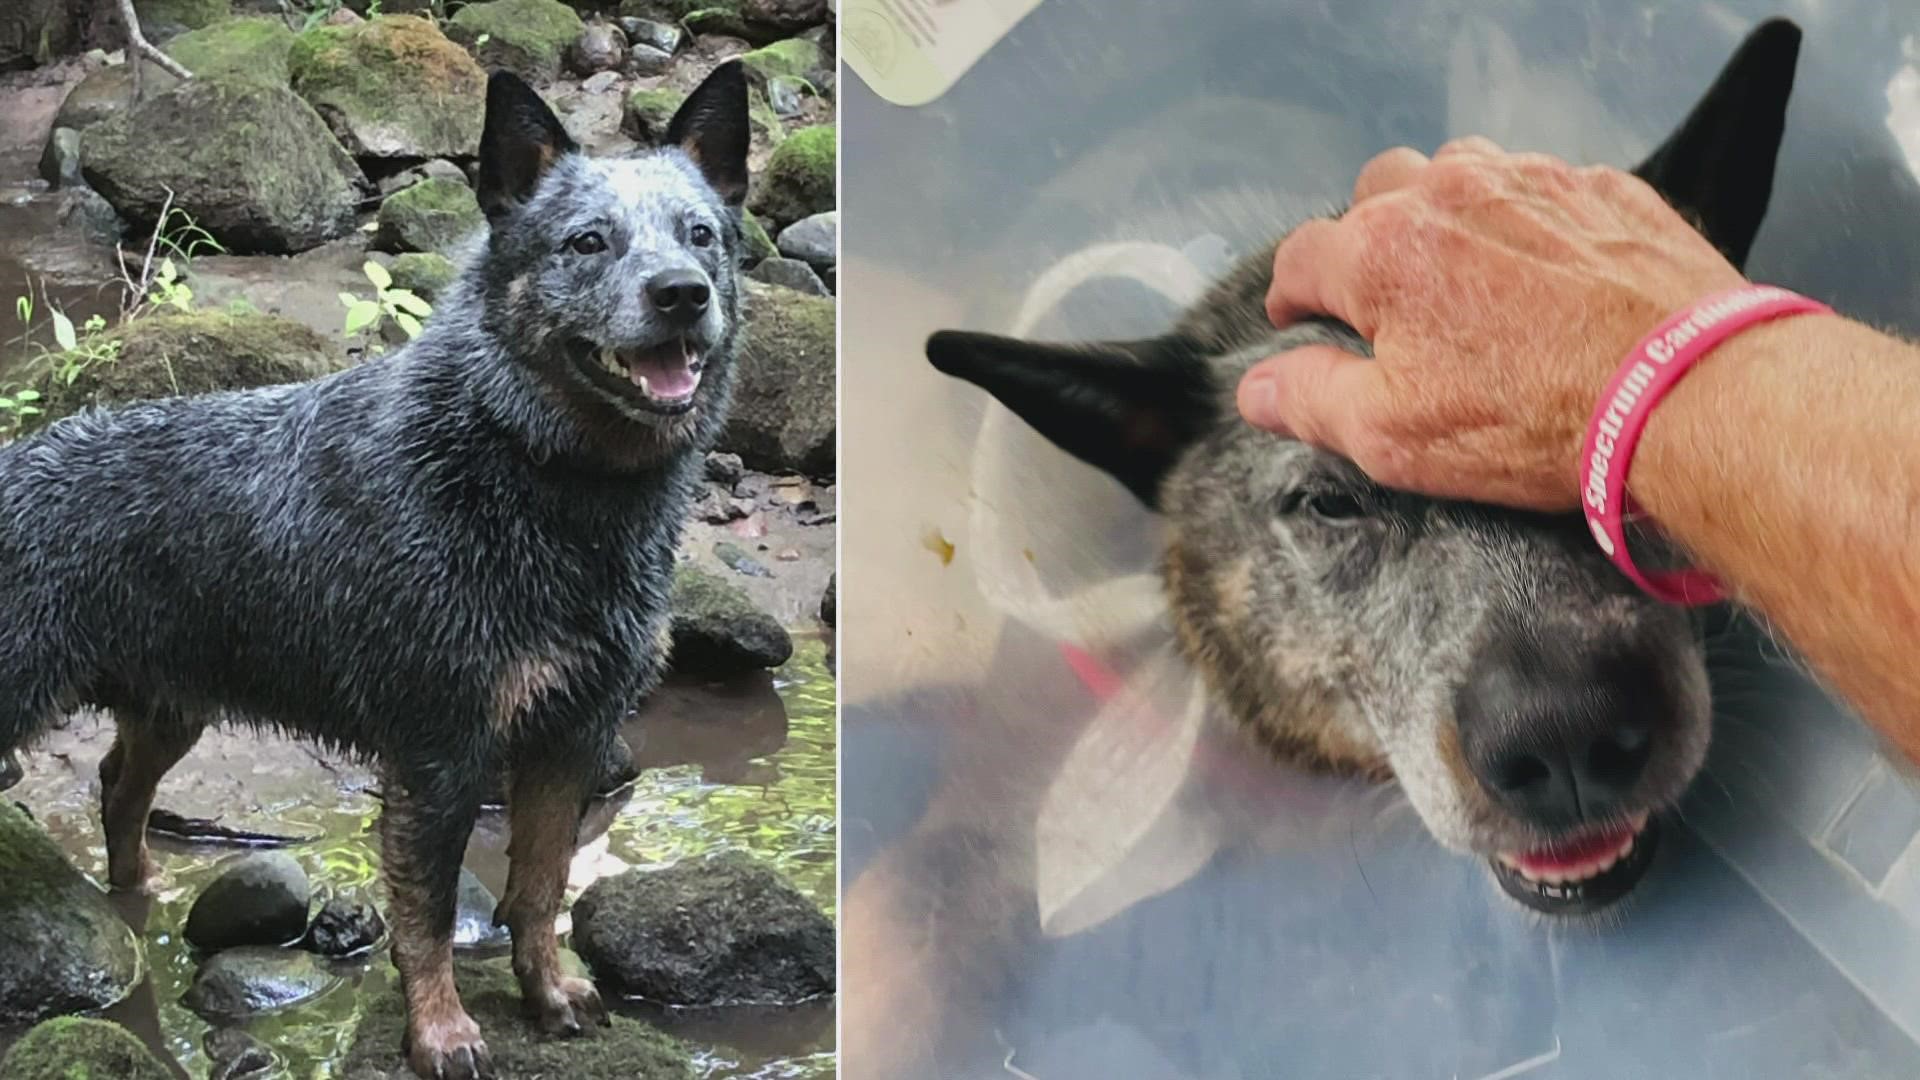 Huck, the 2-year-old Australian Cattle Dog, is scheduled for surgery Wednesday and expected to be home by Thursday